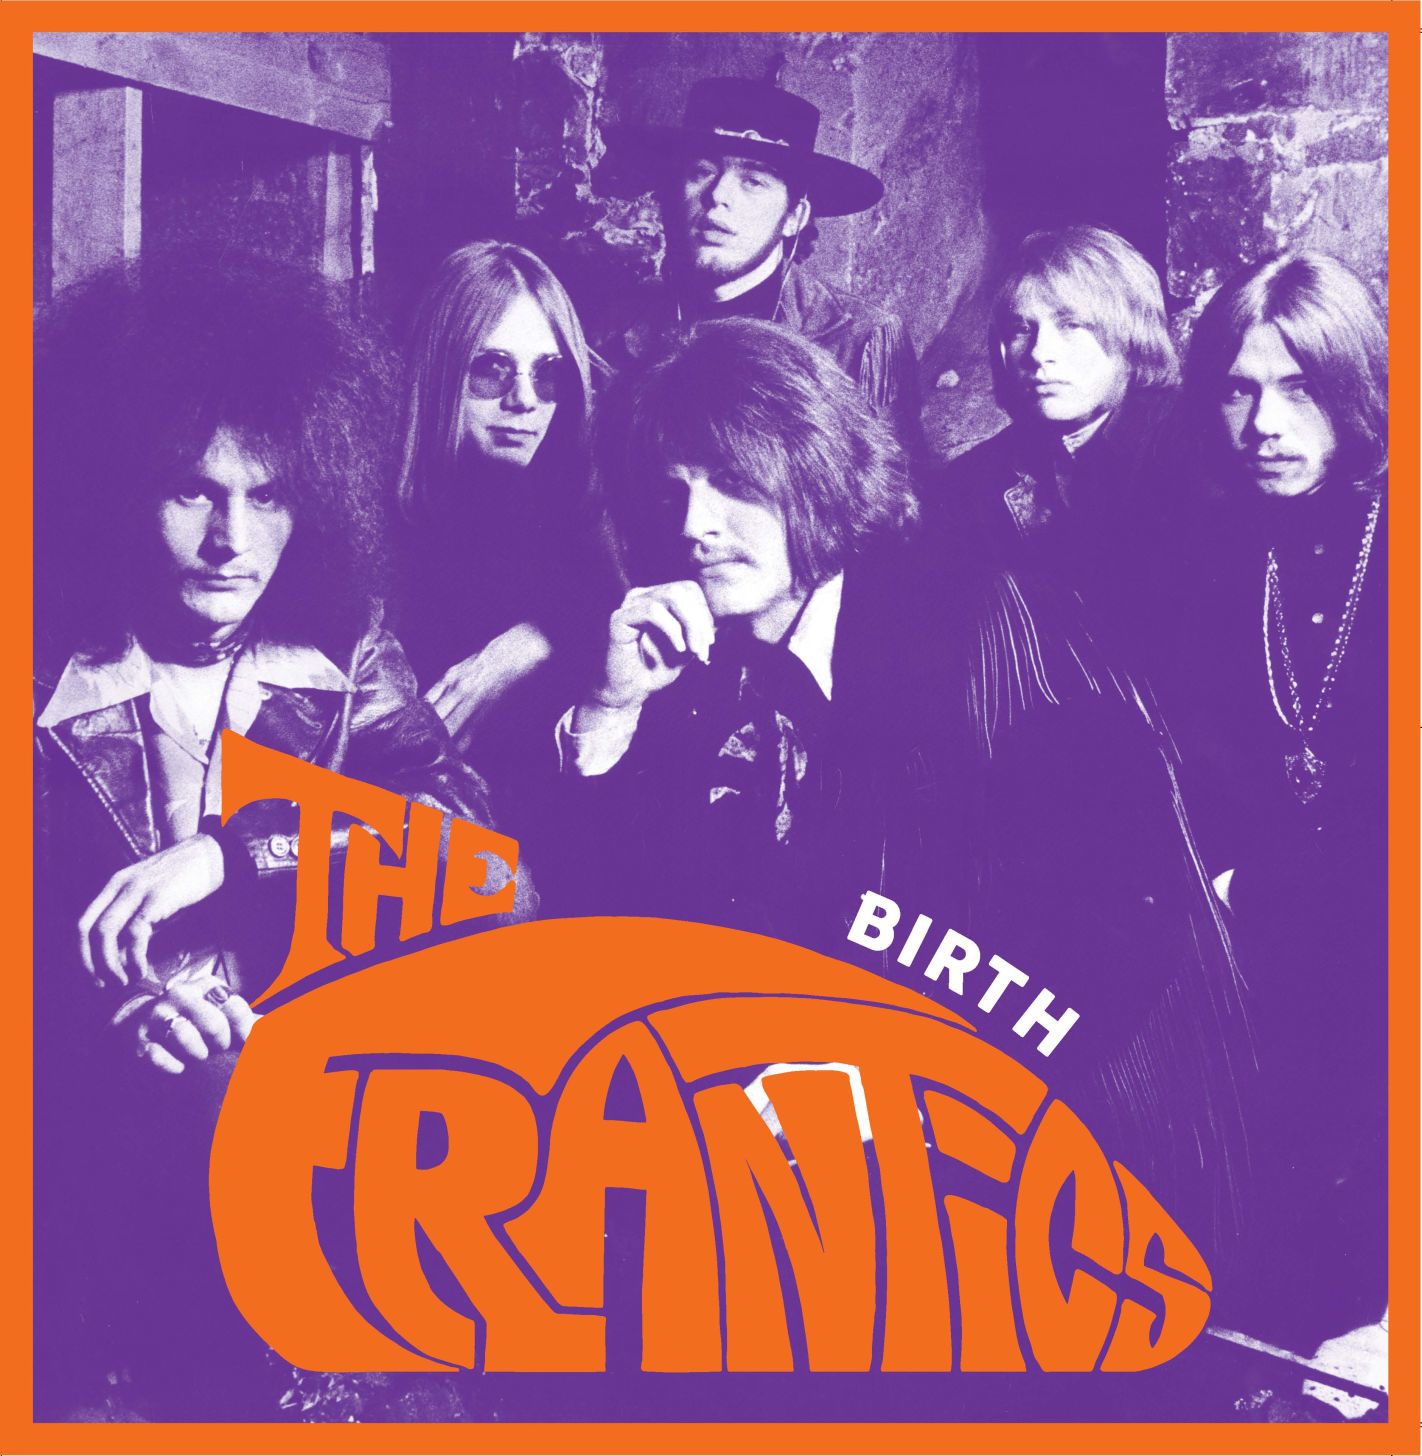 The Frantics: Vintage psych record by Billings group released 50 years later